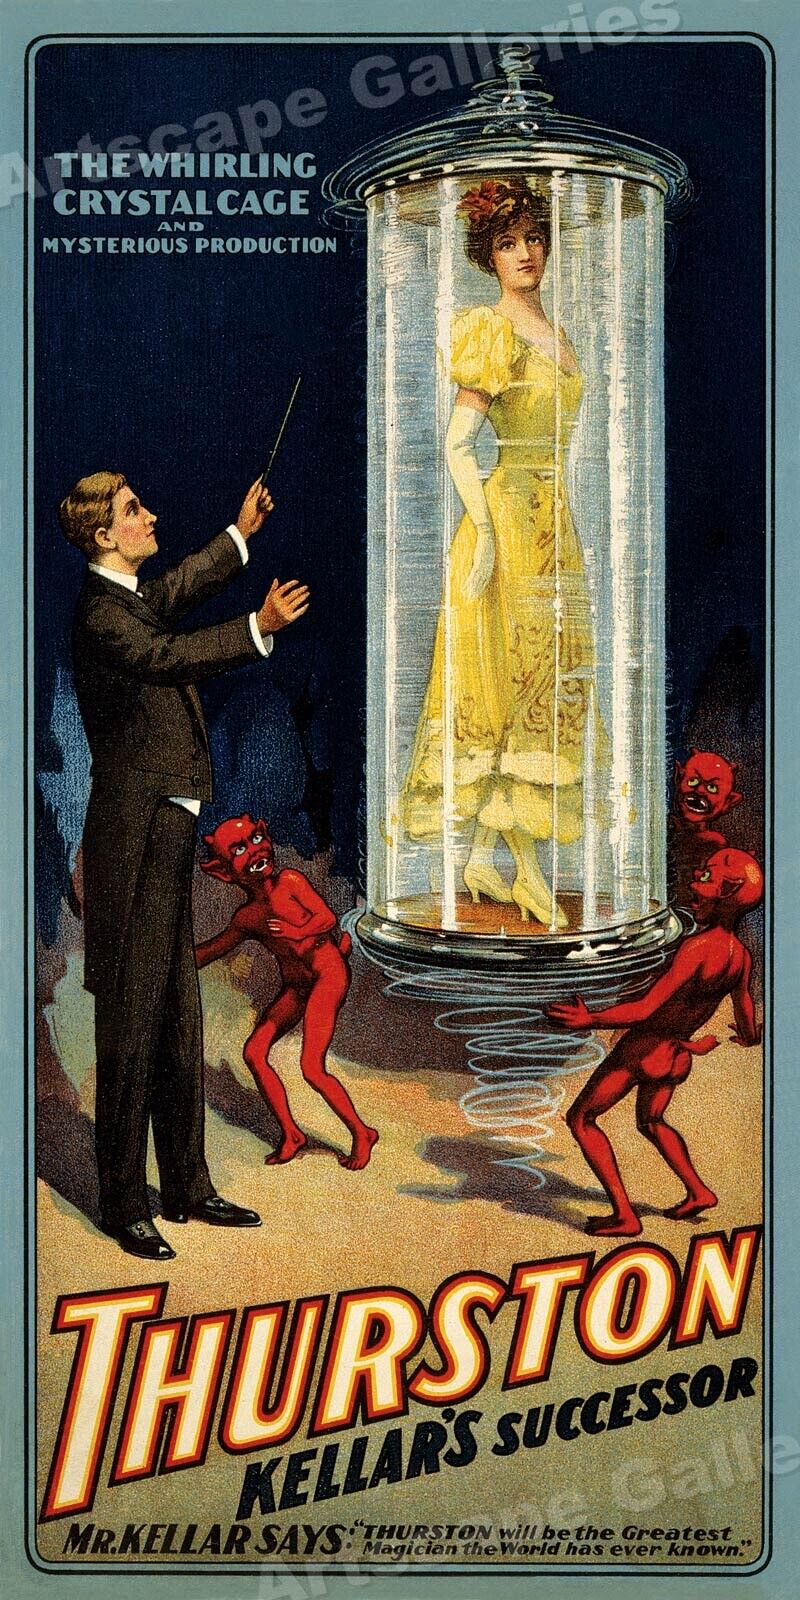 Thurston - The Crystal Cage Classic 1908 Magic Show Poster - 12x24